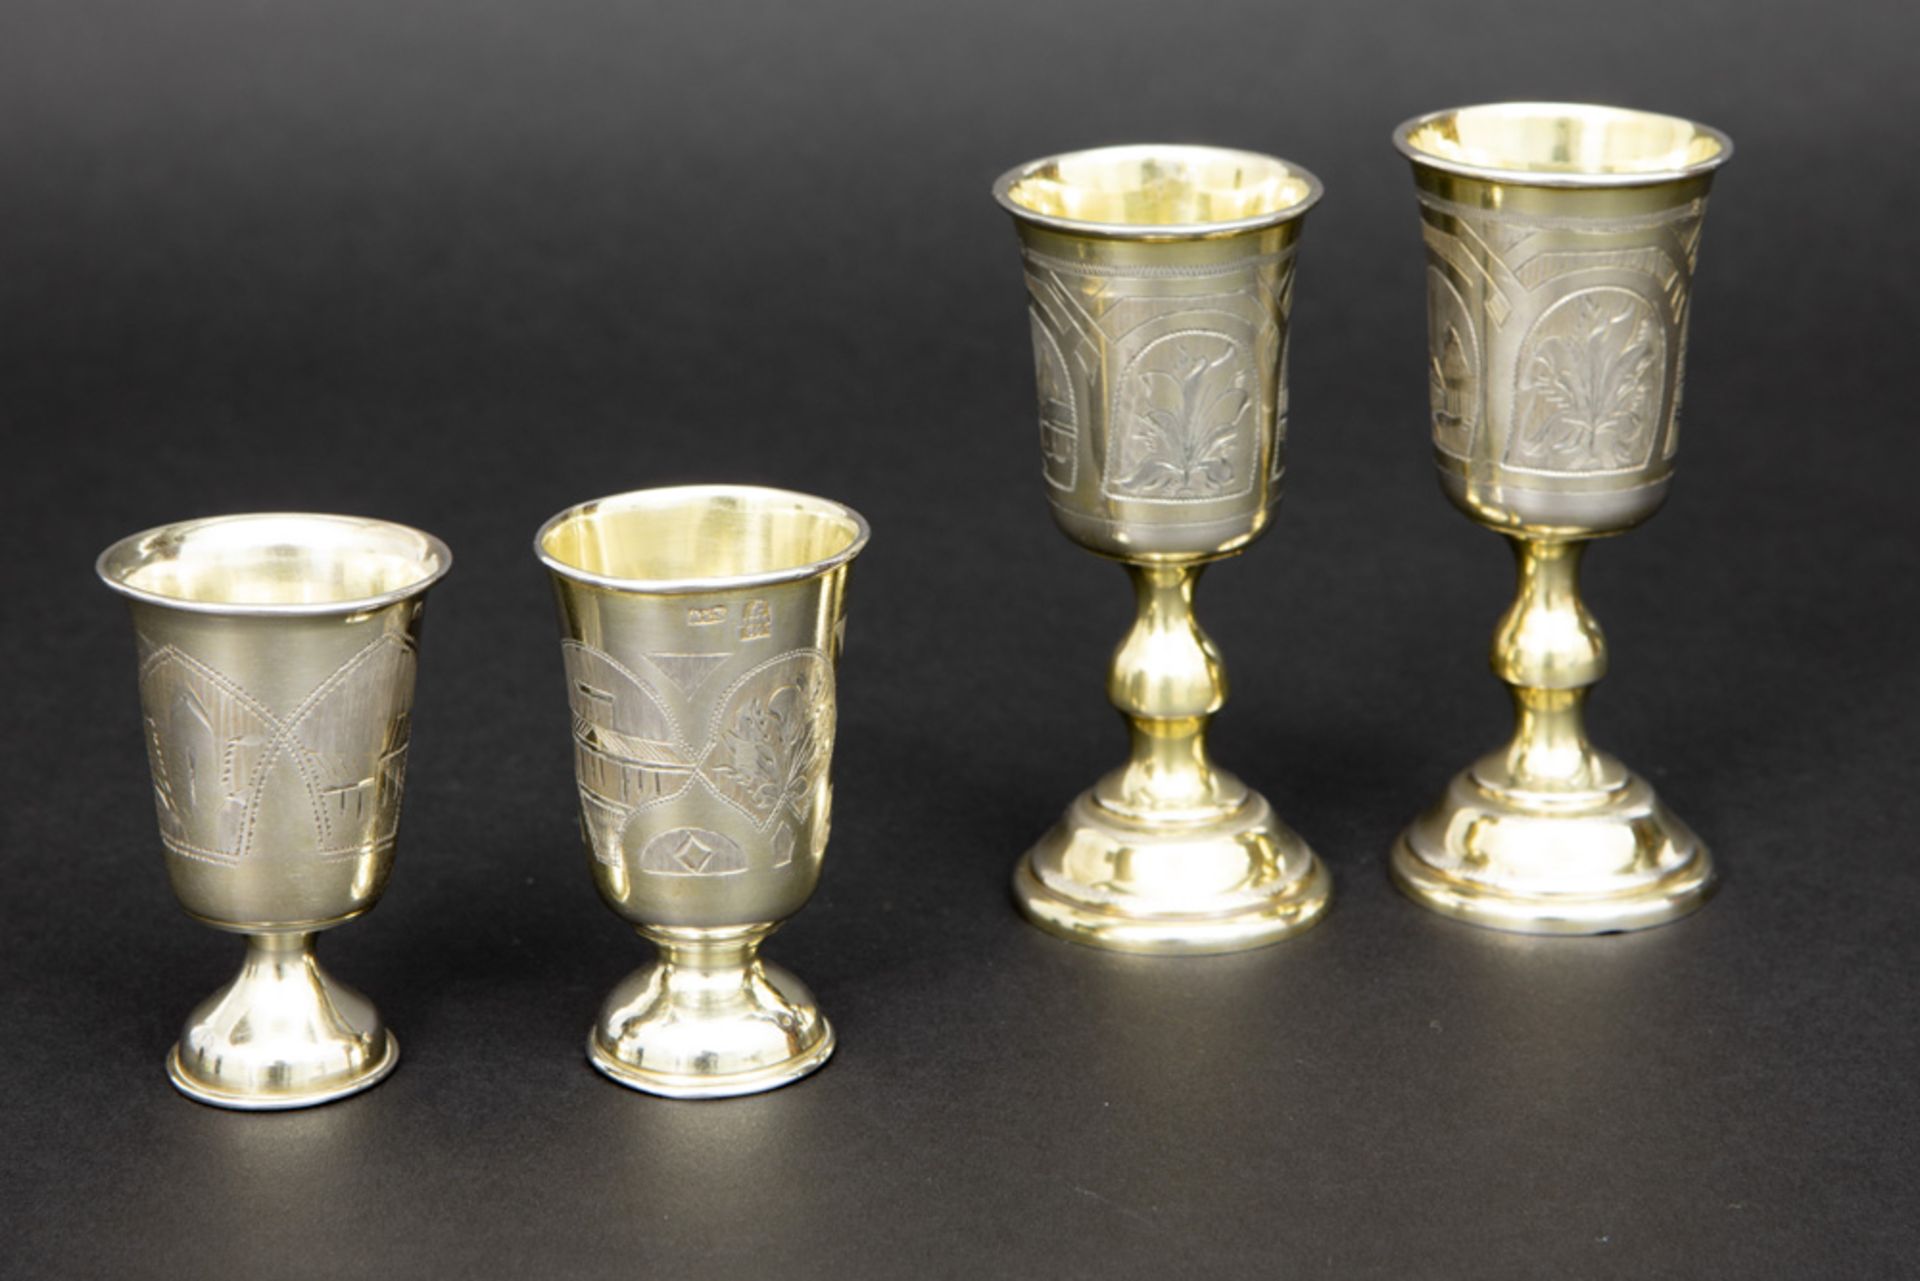 four 19th Cent. Russian liqueur glasses in marked and 1886 dated silver || Lot van vier